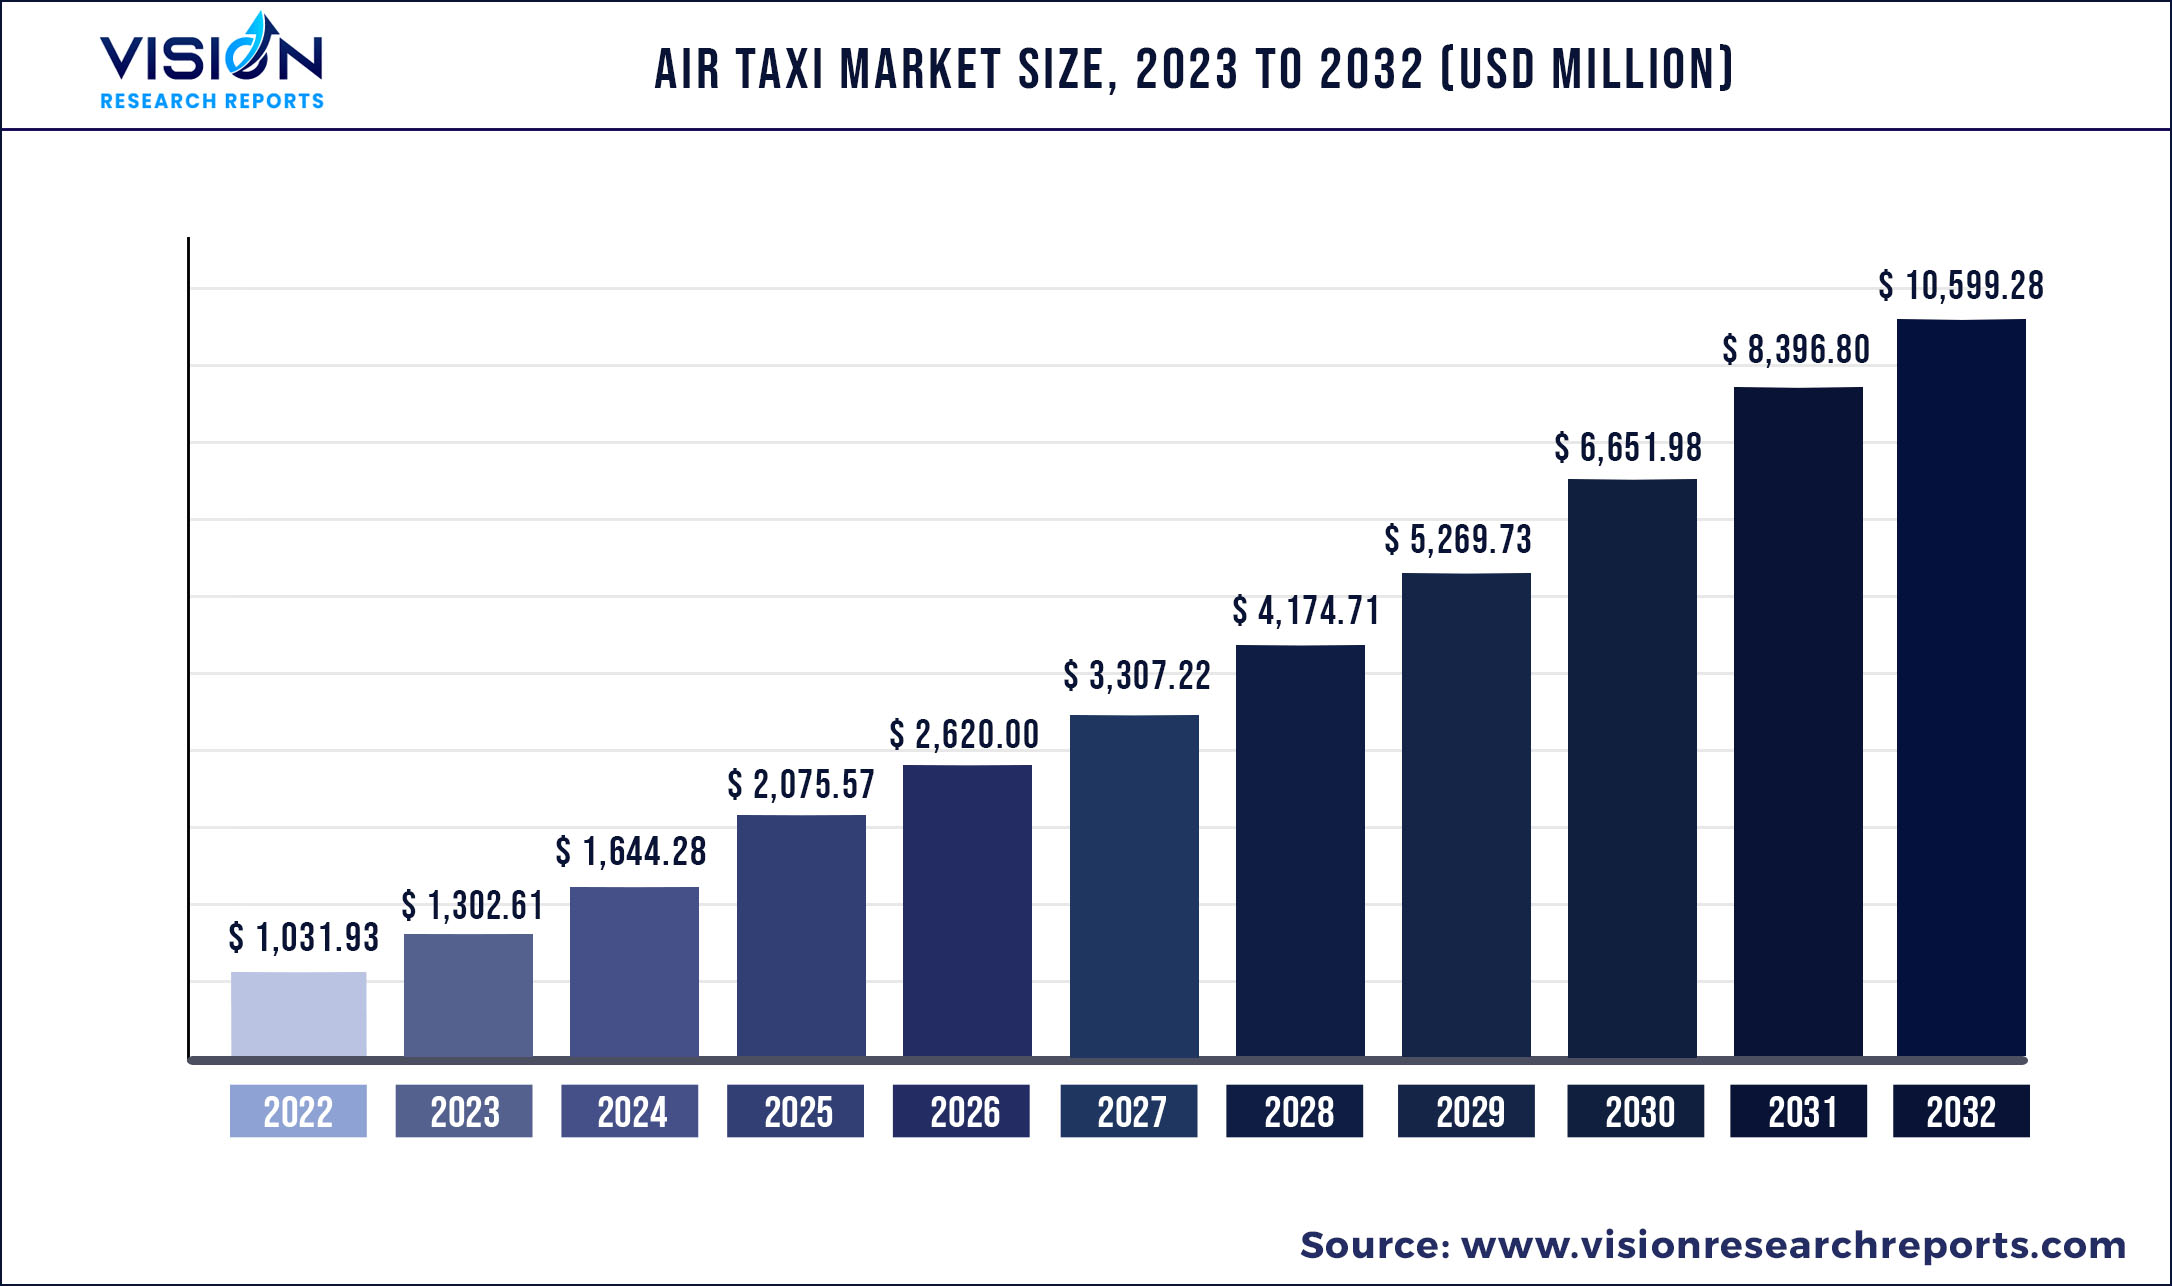 Air Taxi Market Size 2023 to 2032